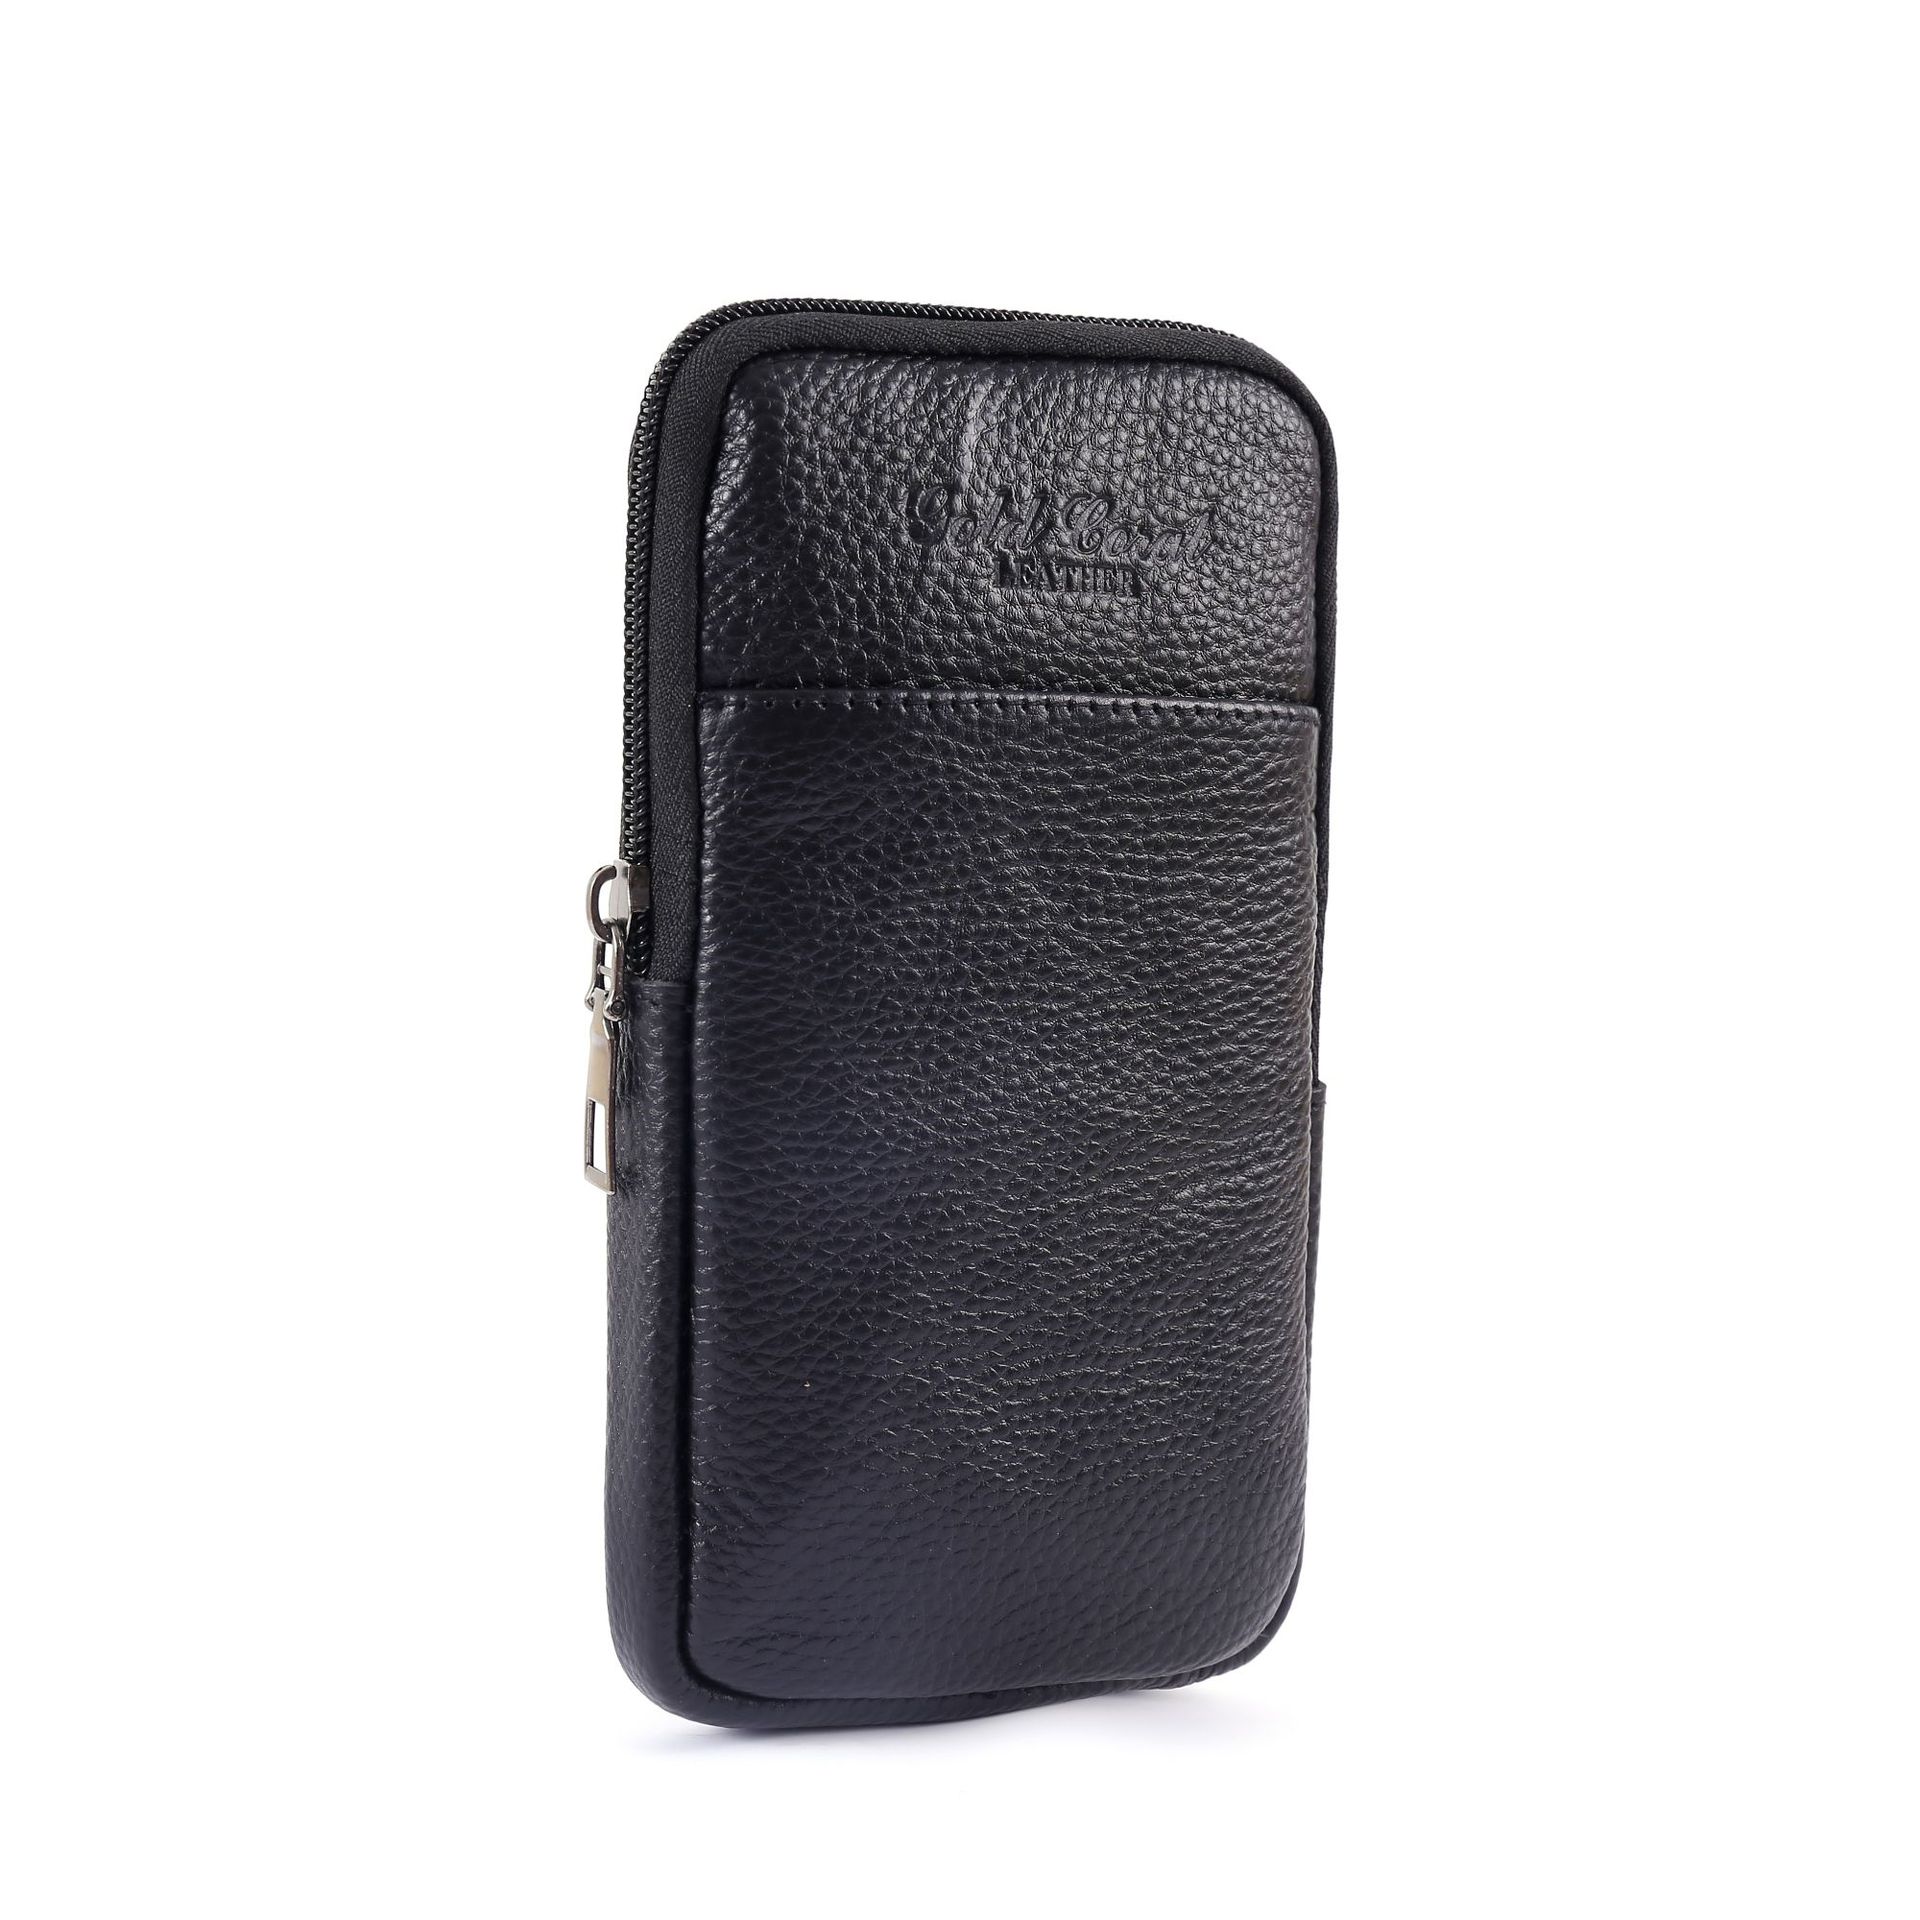 Hot-Selling New Arrival for Men Belt Mobile Phone Bag Men's Real-Leather Bag Bag Casual Cowhide Outdoor Pocket Thin Section Factory Wholesale